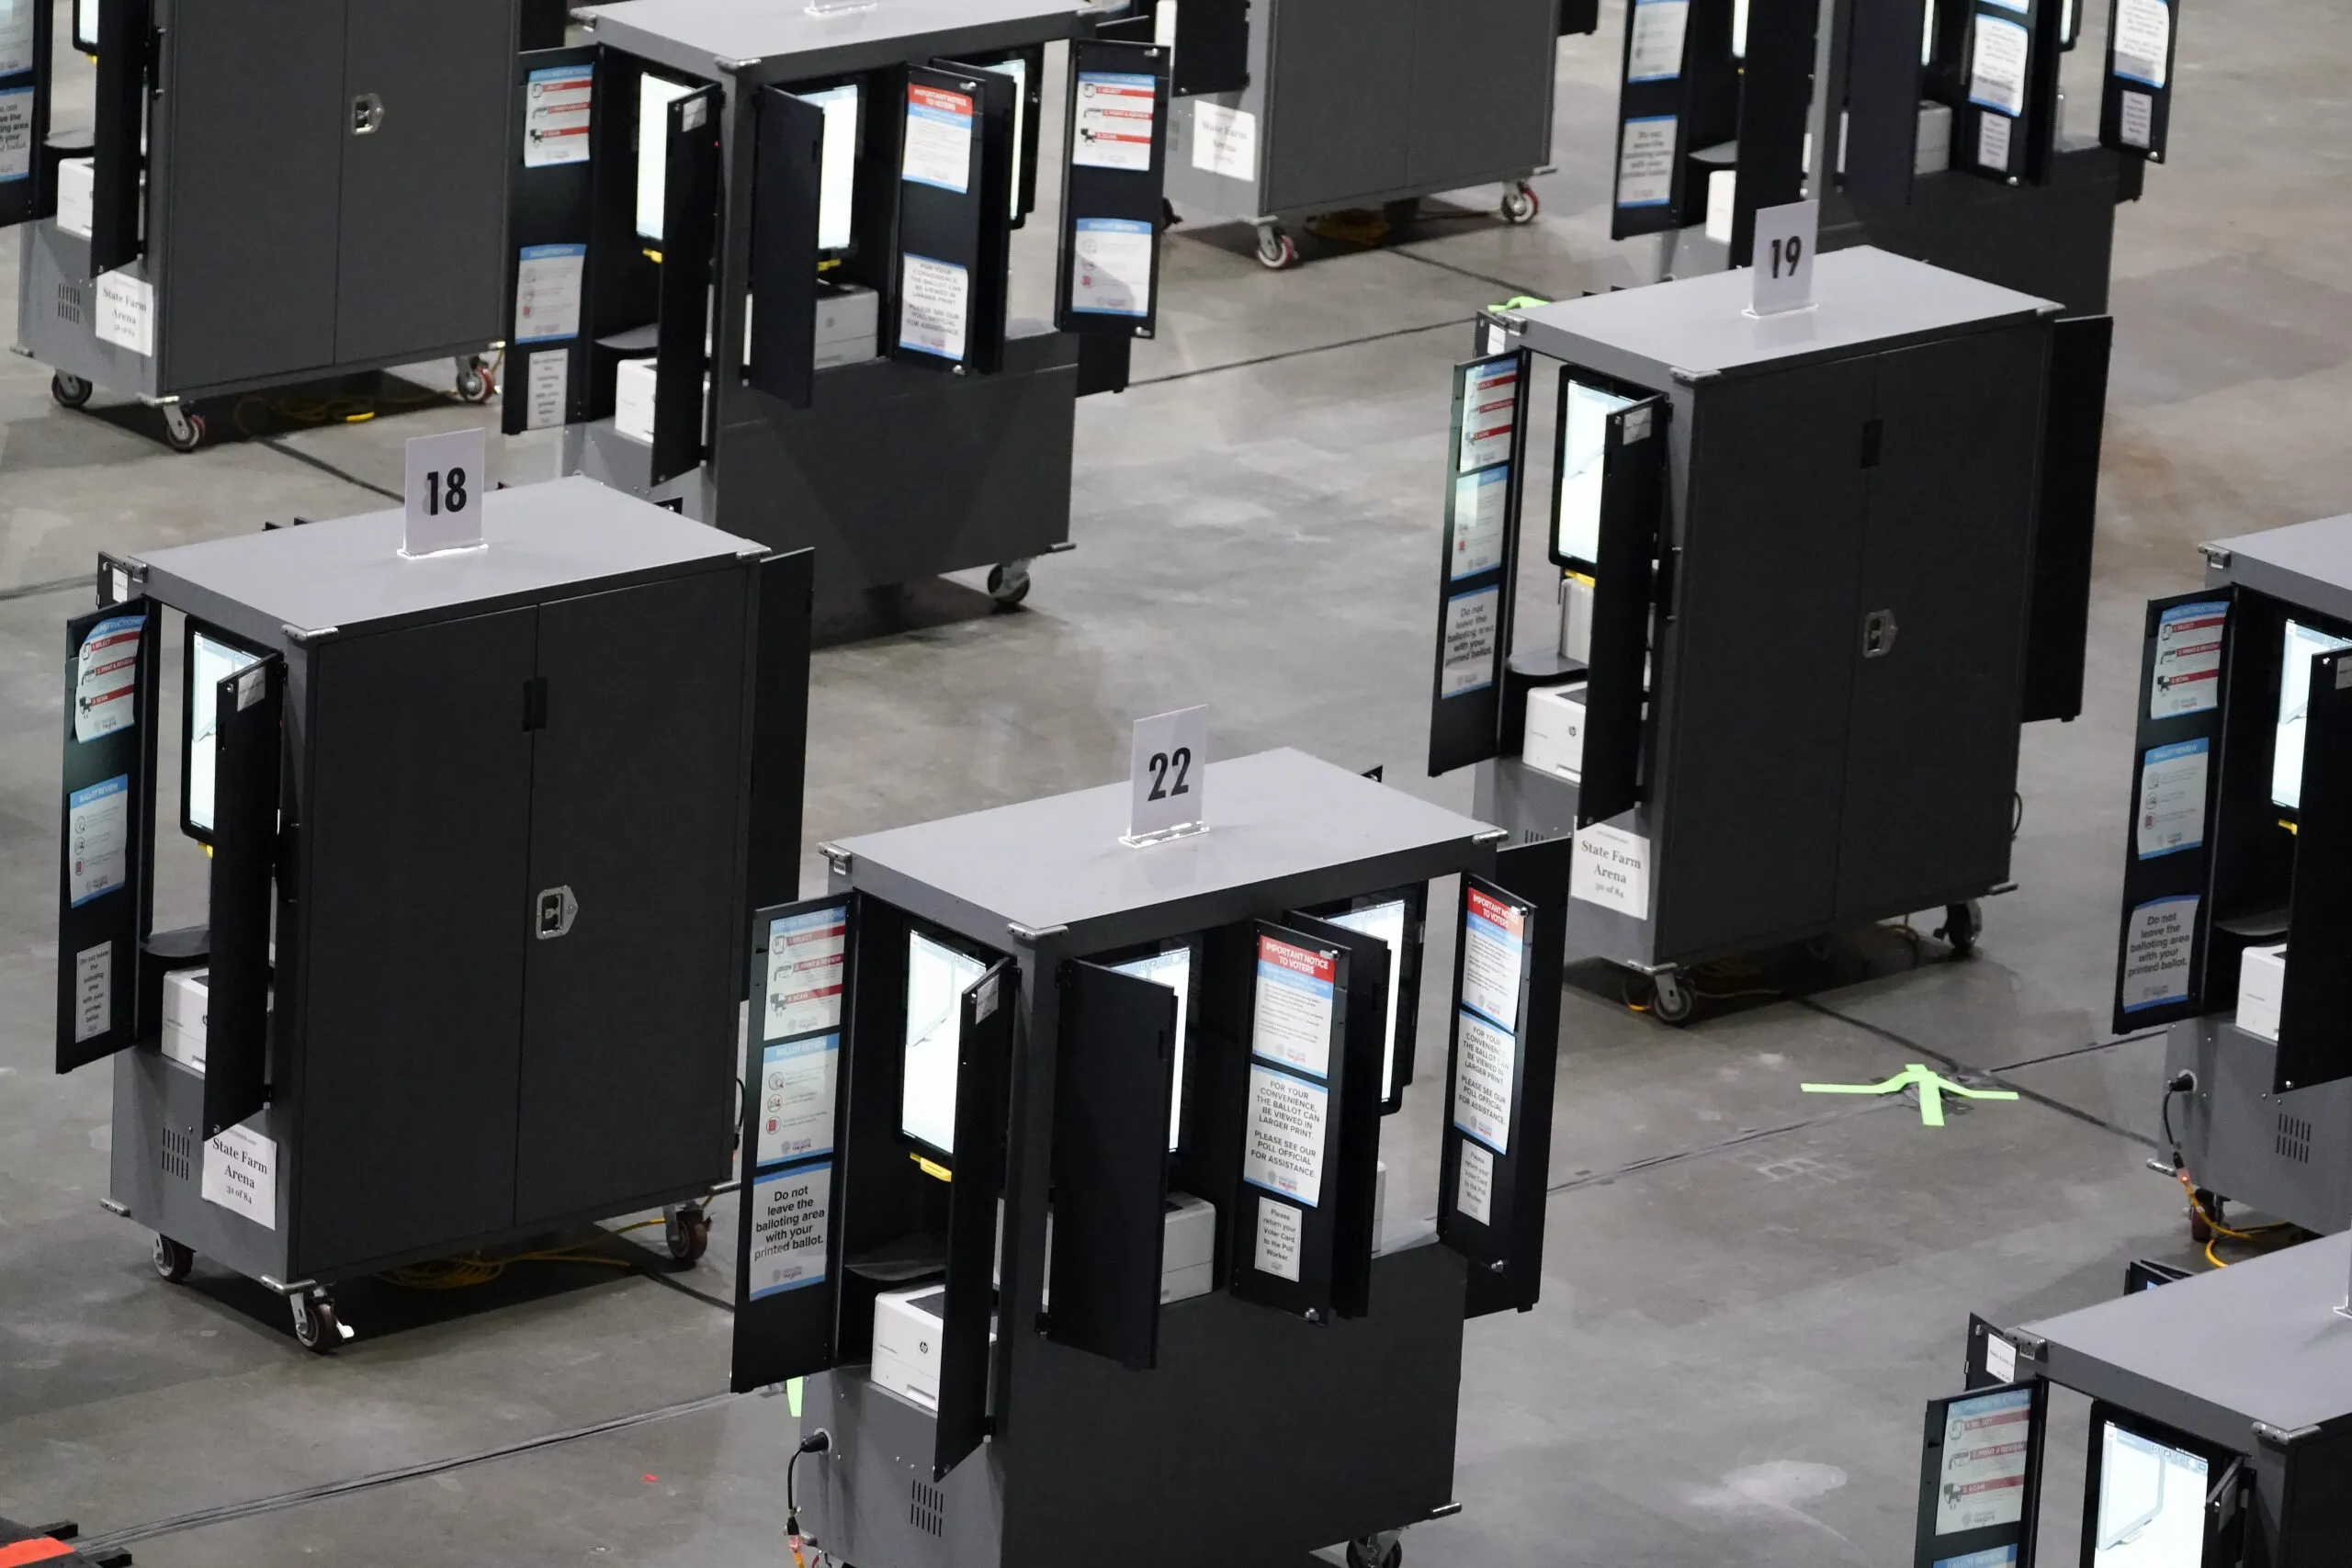 6,000 Dominion Voting Machines Exposed ‘Miscalculating’ Votes in Puerto Rico Elections